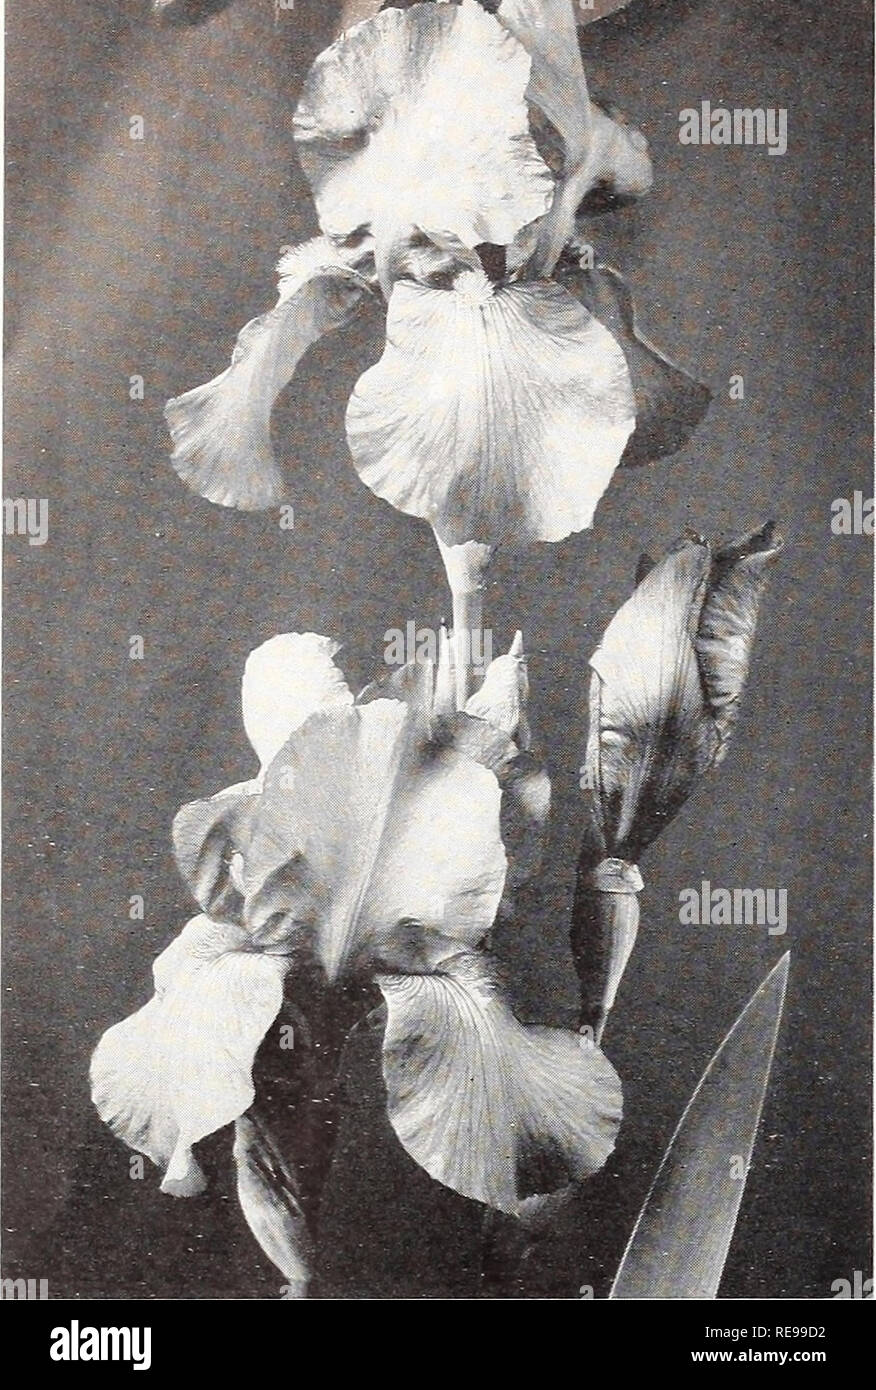 . Cooley's Gardens : Silverton Oregon 1935. Nurseries (Horticulture) Catalogs; Irises (Plants) Catalogs. JEAN CAYEUX JEAN CAYEUX Certainly one of the most beautiful irises we have ever flowered in our gardens. Likewise, it is one of the most unusual in color—a soft, smooth, light buff, described by some as &quot;coffee colored&quot; and by others as Havana-brown. The form is perfect, as the accom- panying illustration shows, and the size is larger than average. It is splendidly branched, over three feet tall, and flowers over a long season. Jean Cayeux has been awarded a Certificate of Merit b Stock Photo